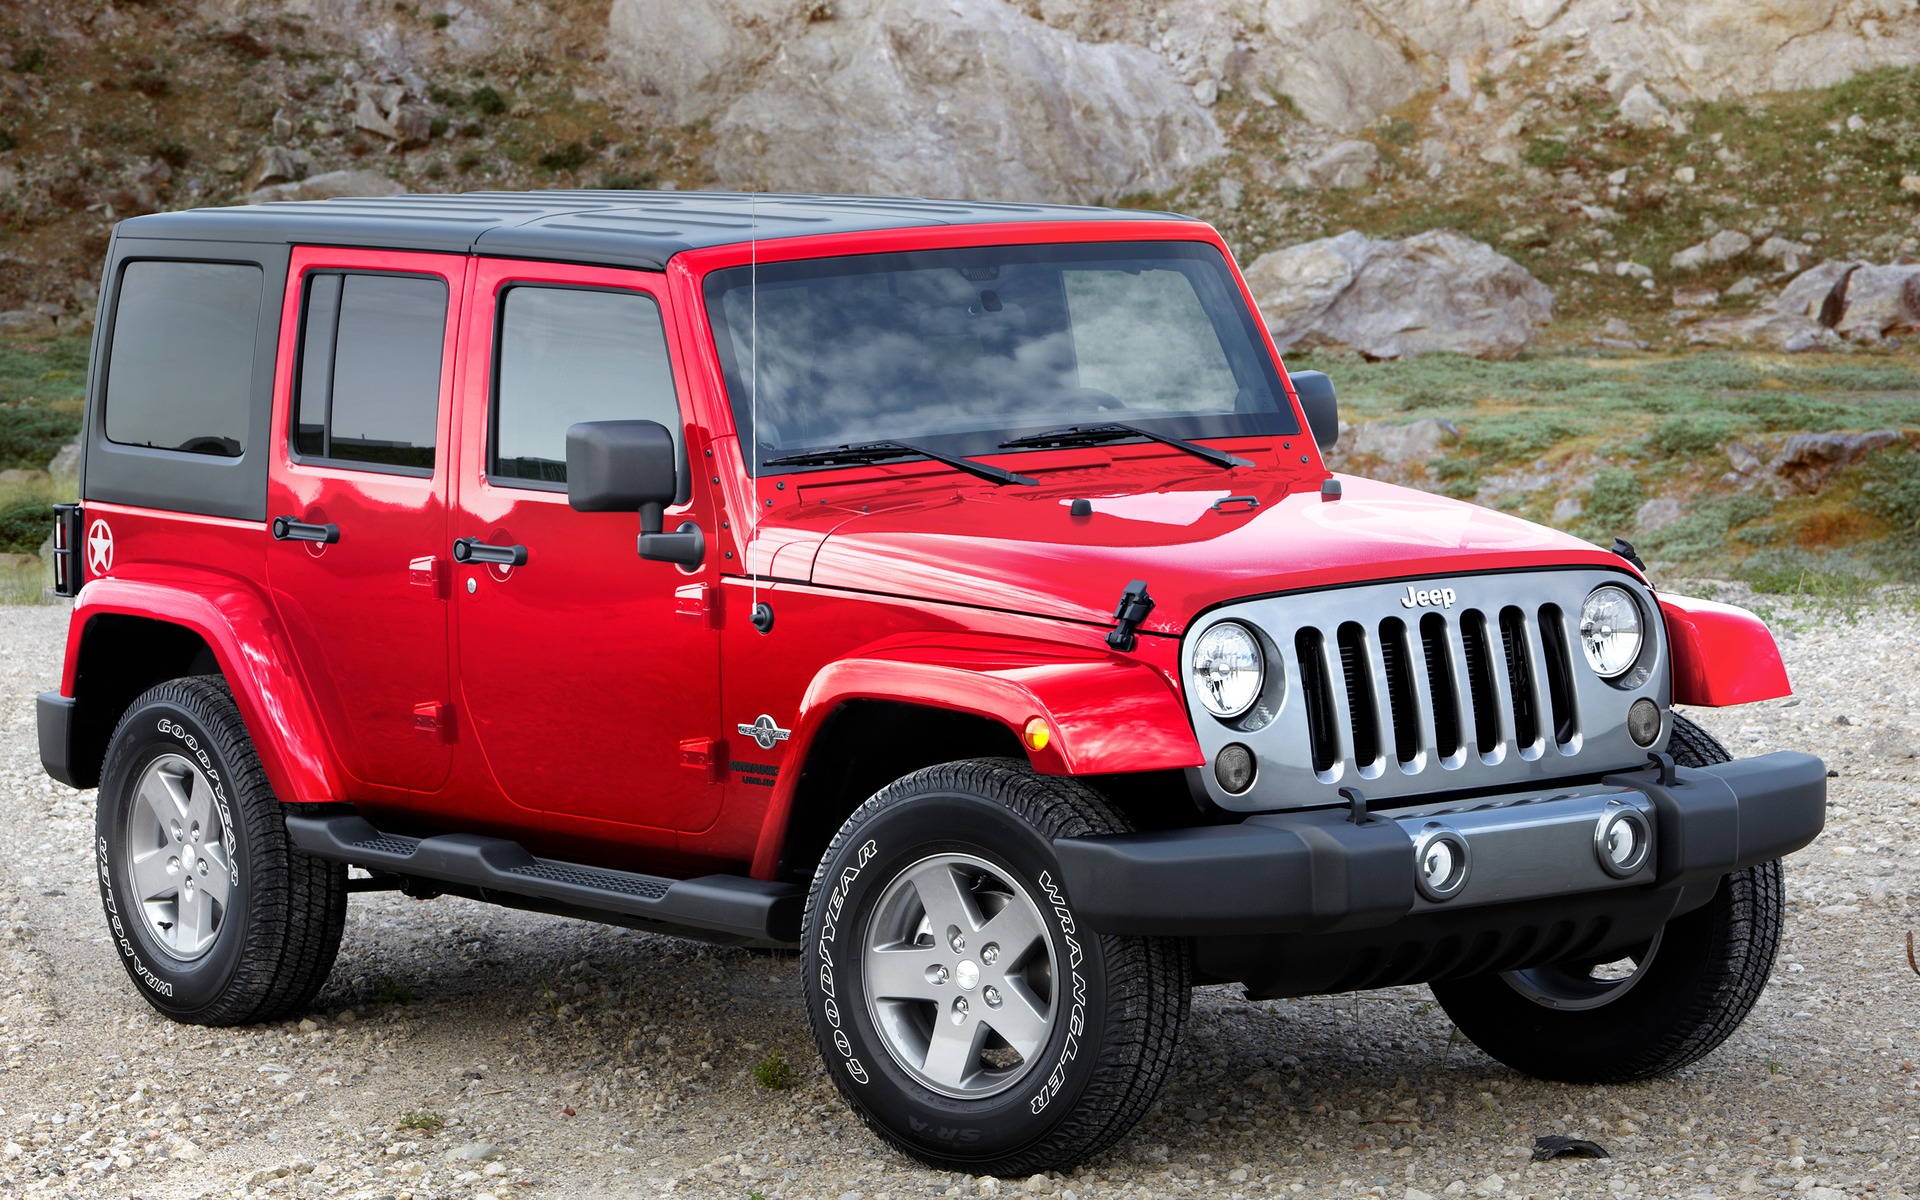 The available hardtop helps to keep winter's chill at bay.